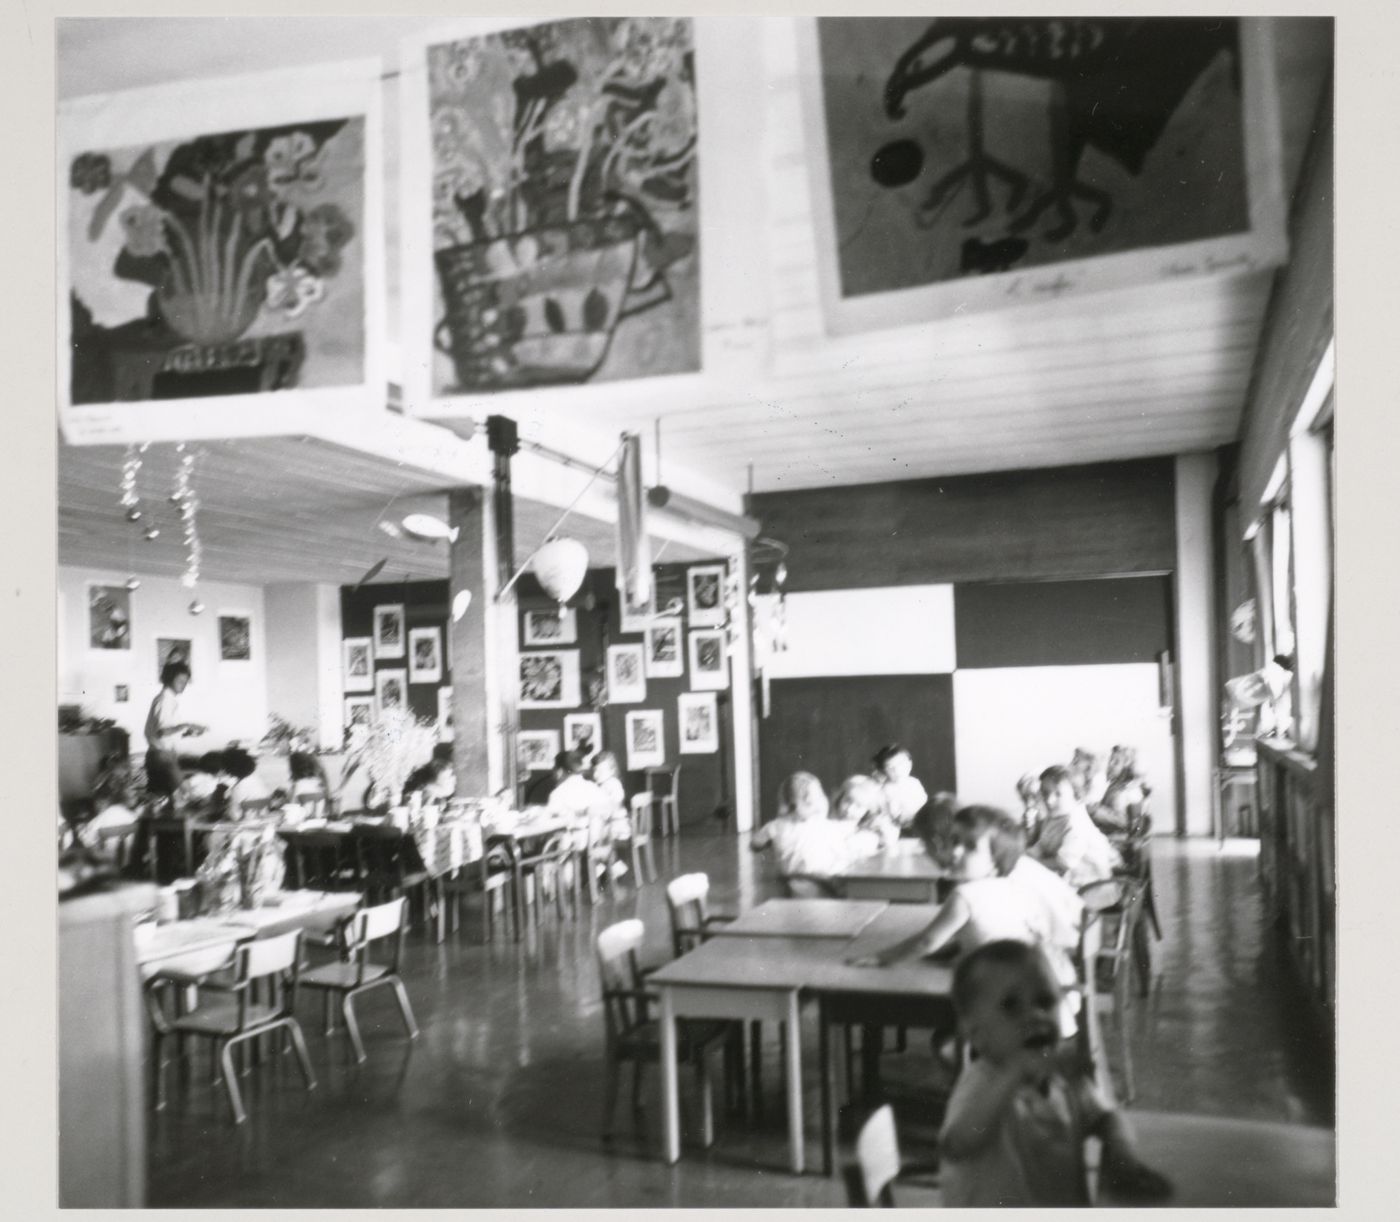 Interior view of the nursery school classroom showing a class underway, Unité d'habitation, Marseille, France